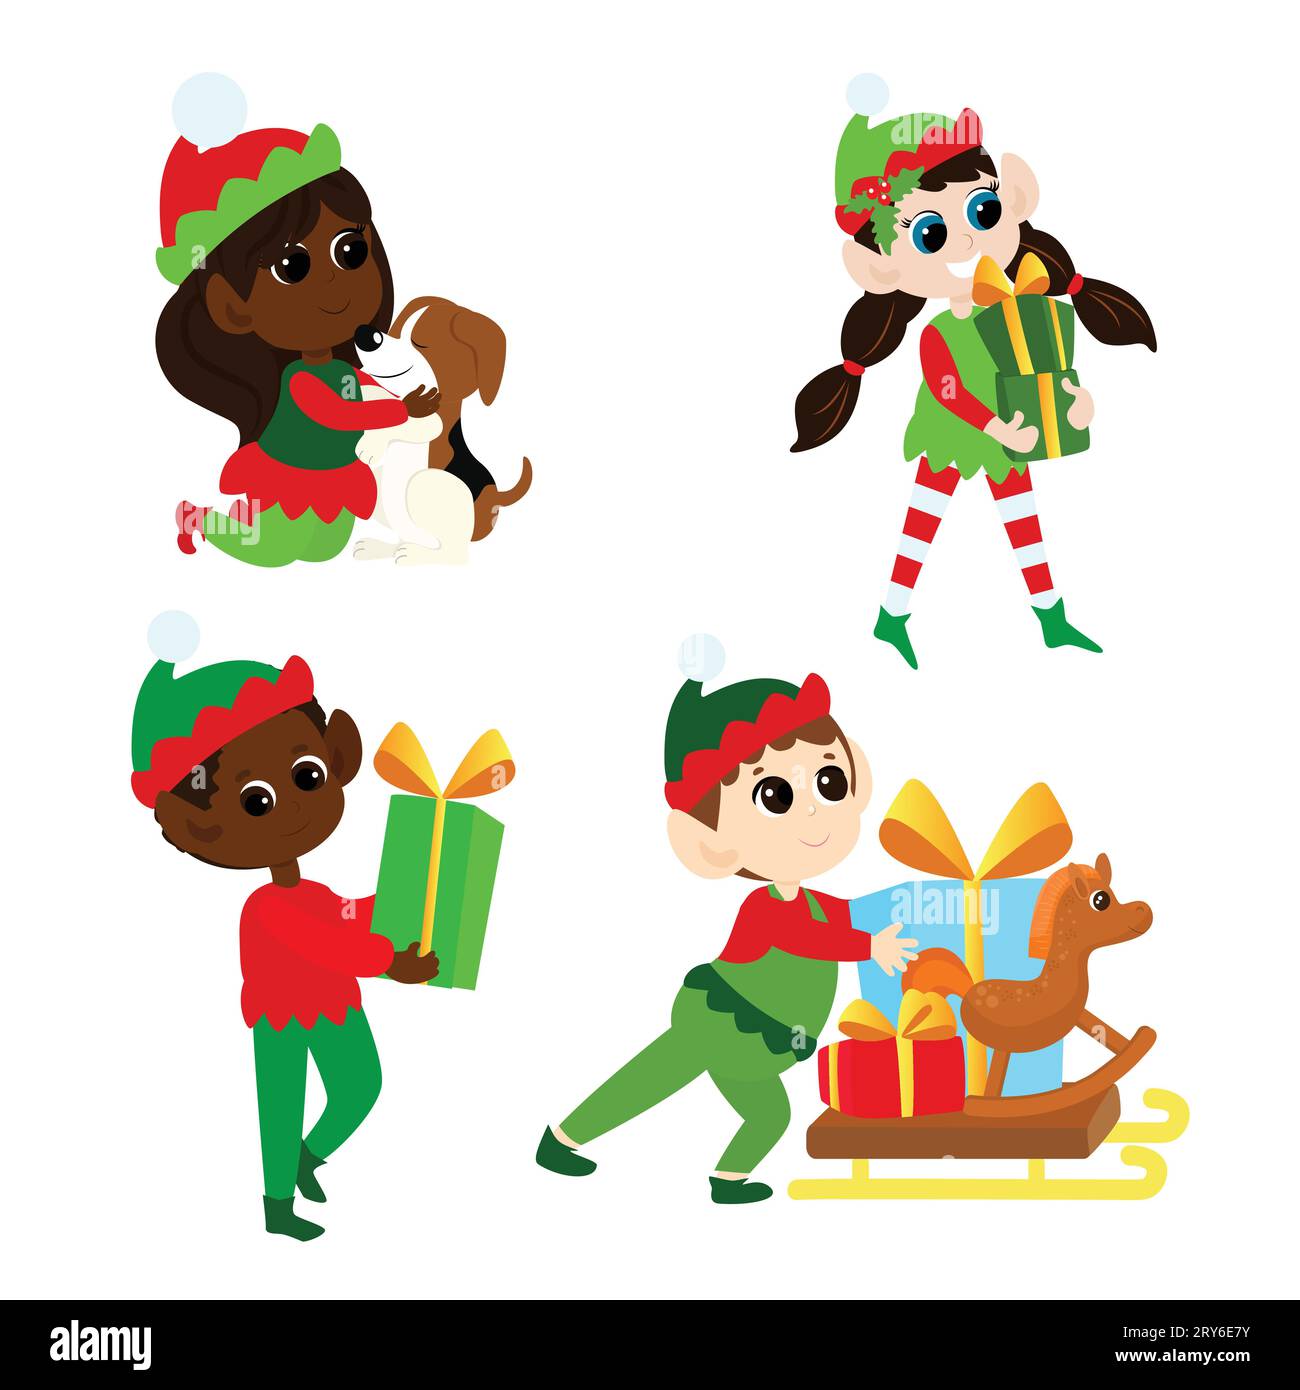 Set Christmas elves. Multicultural boys and girls in traditional elf costumes. Santa's helpers are happy. They dance, smile, bring gifts. Stock Vector